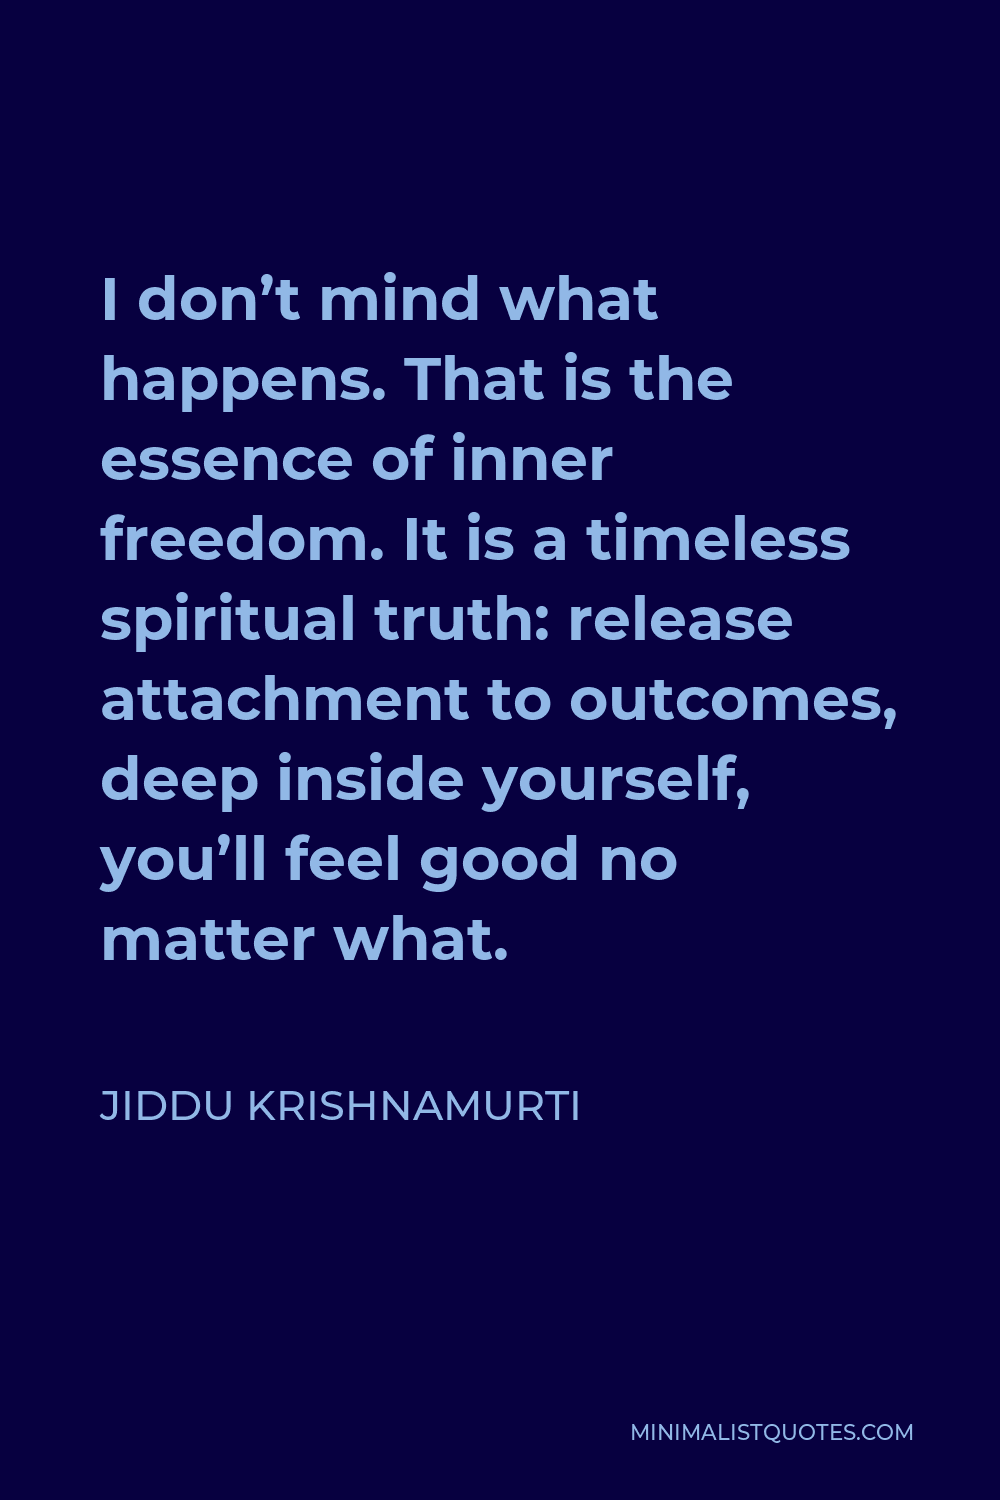 Jiddu Krishnamurti Quote - I don’t mind what happens. That is the essence of inner freedom. It is a timeless spiritual truth: release attachment to outcomes, deep inside yourself, you’ll feel good no matter what.